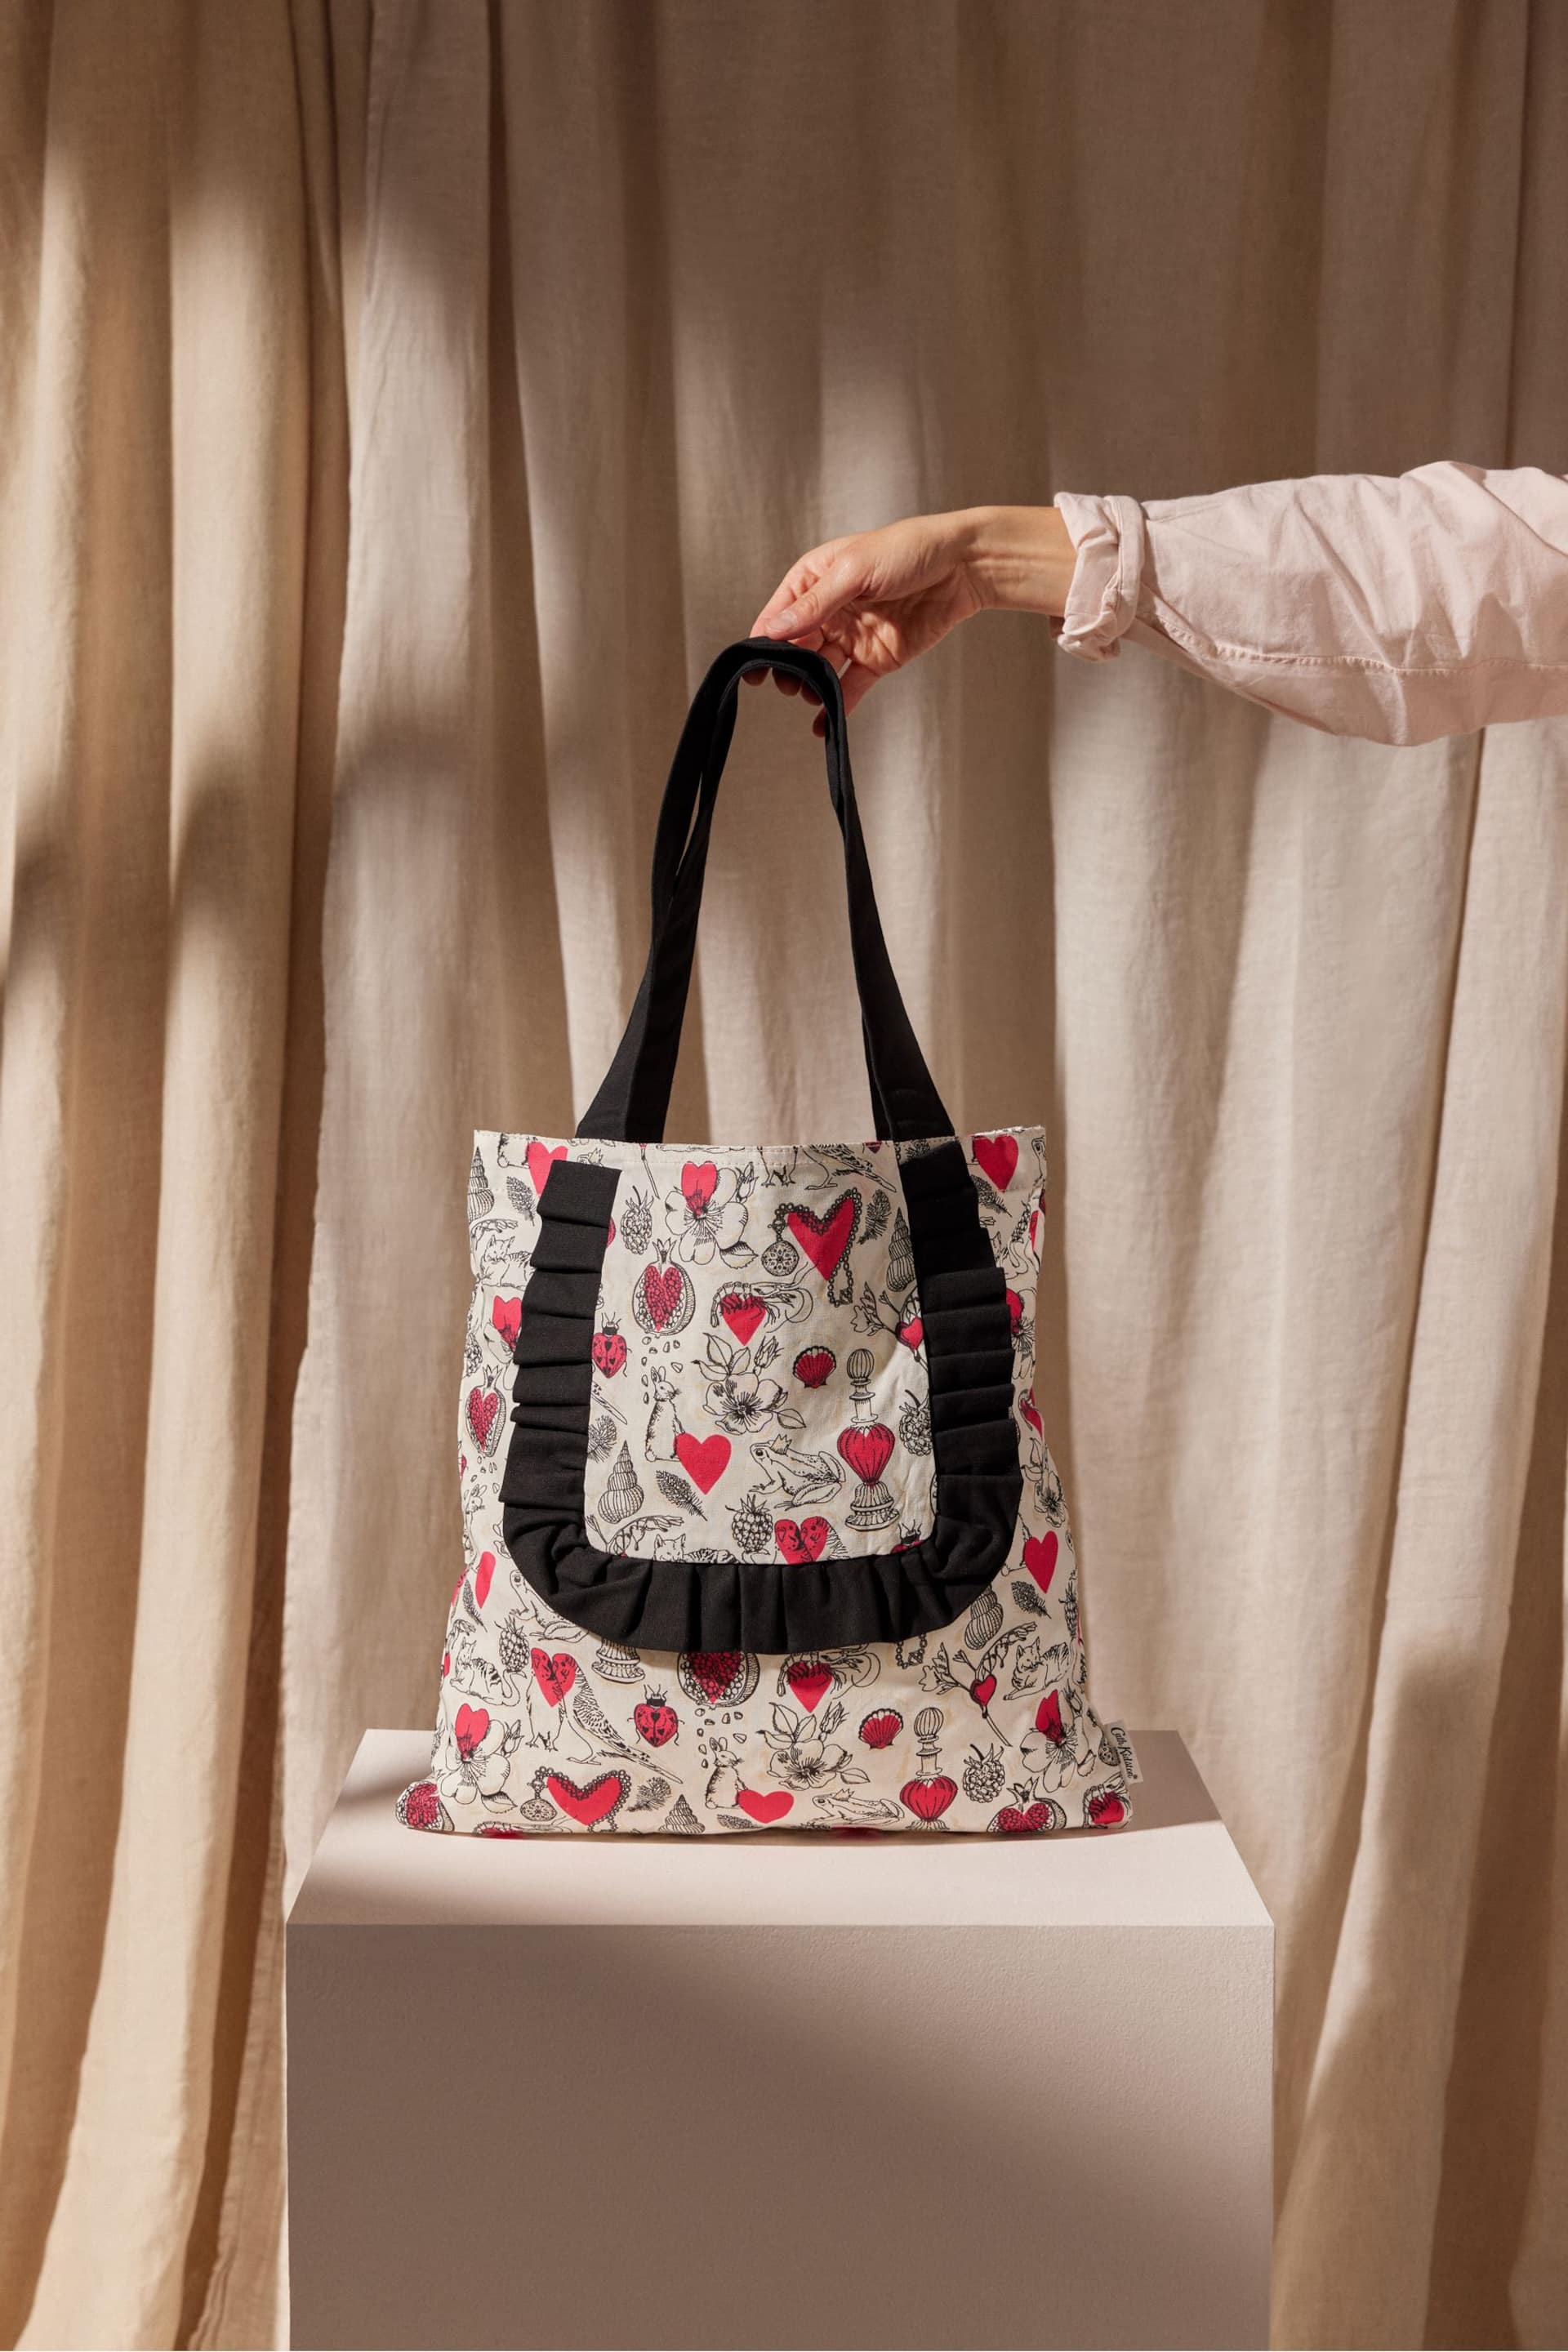 Cath Kidston Casual Canvas Tote Bag - Image 5 of 7